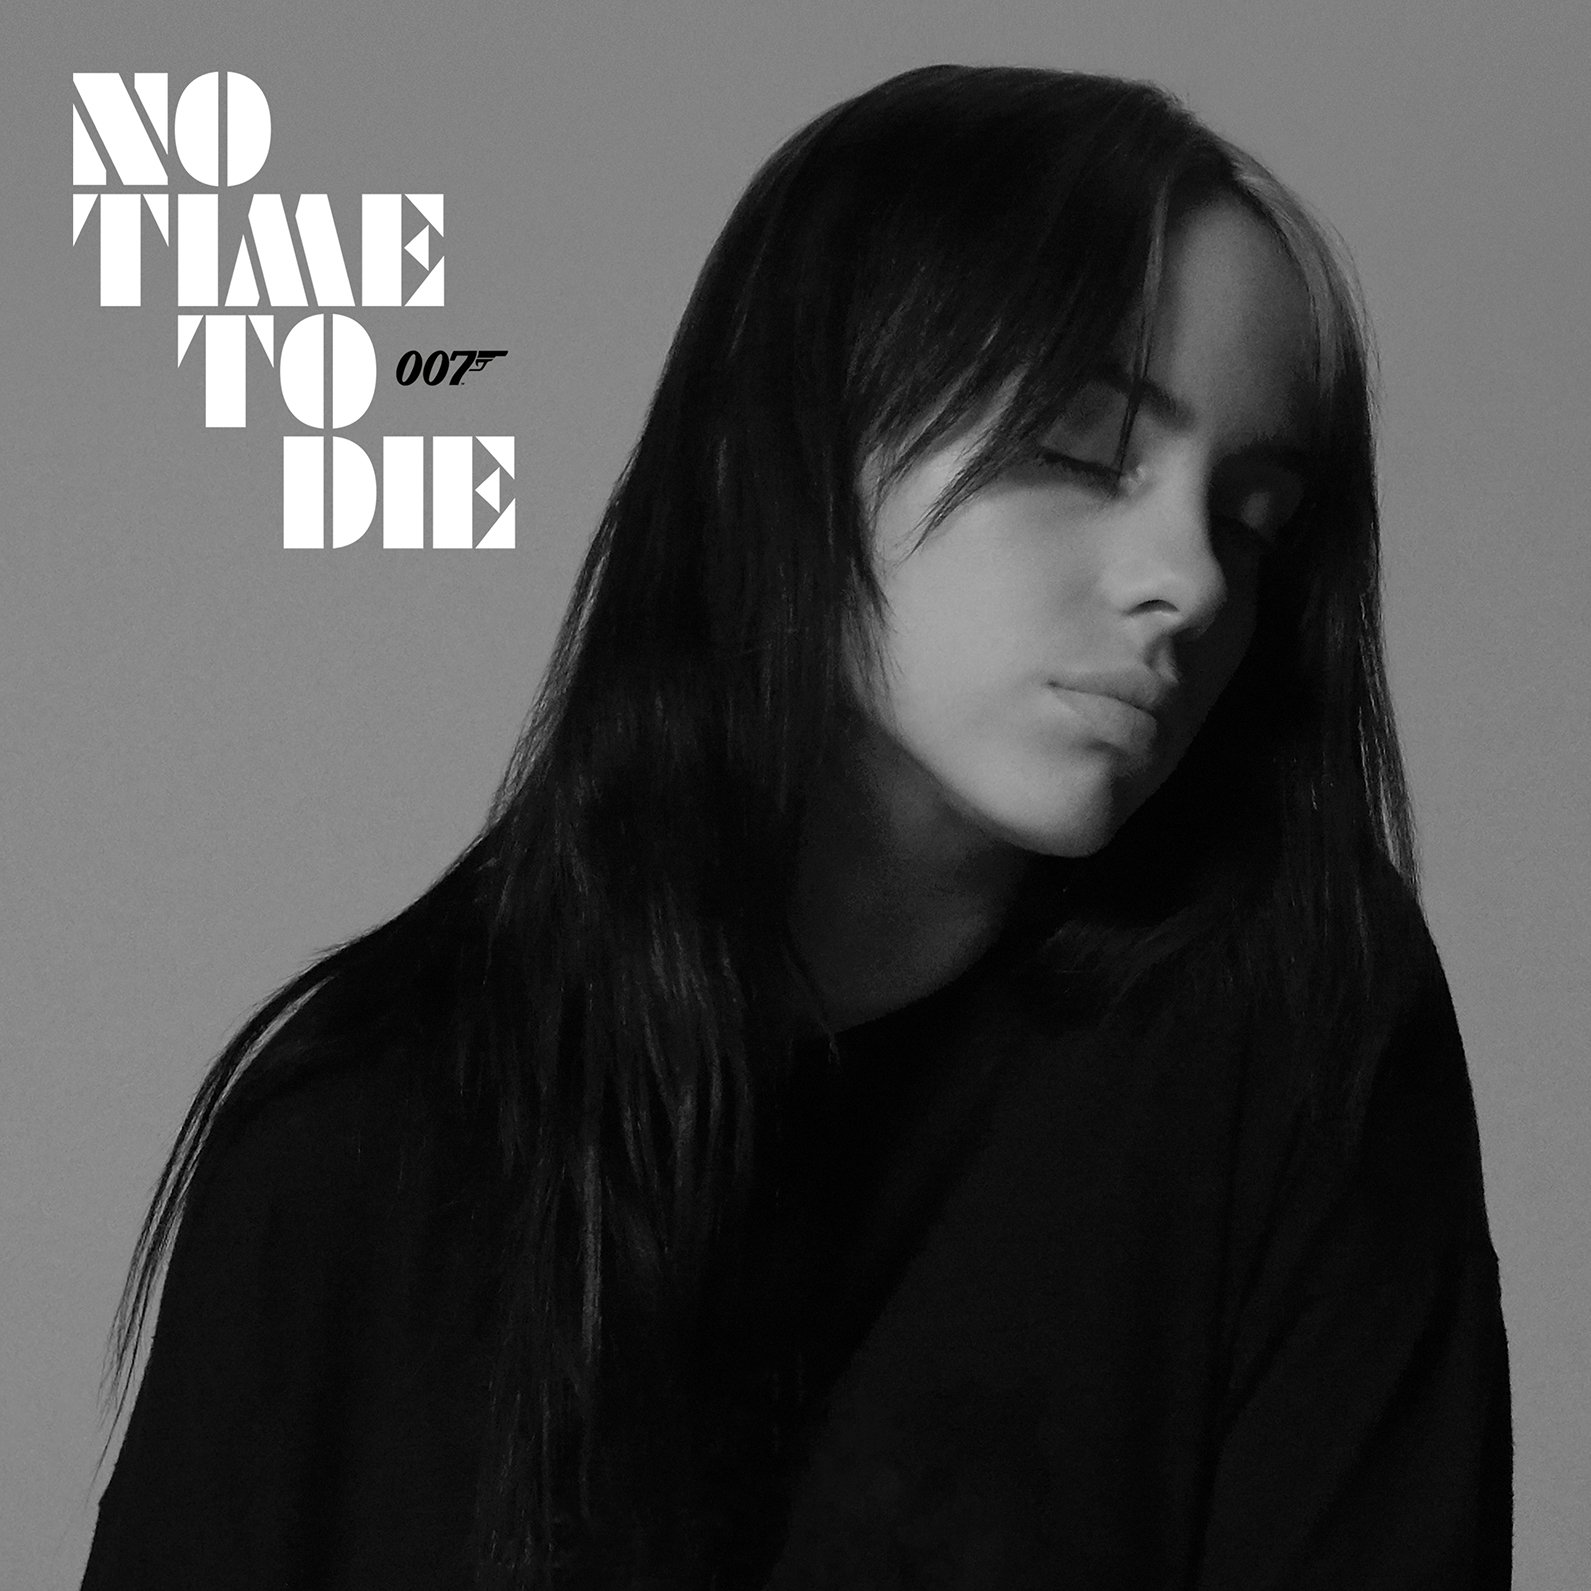 BILLIE EILISH releases ‘No Time To Die’ the official theme song to the upcoming James Bond film 